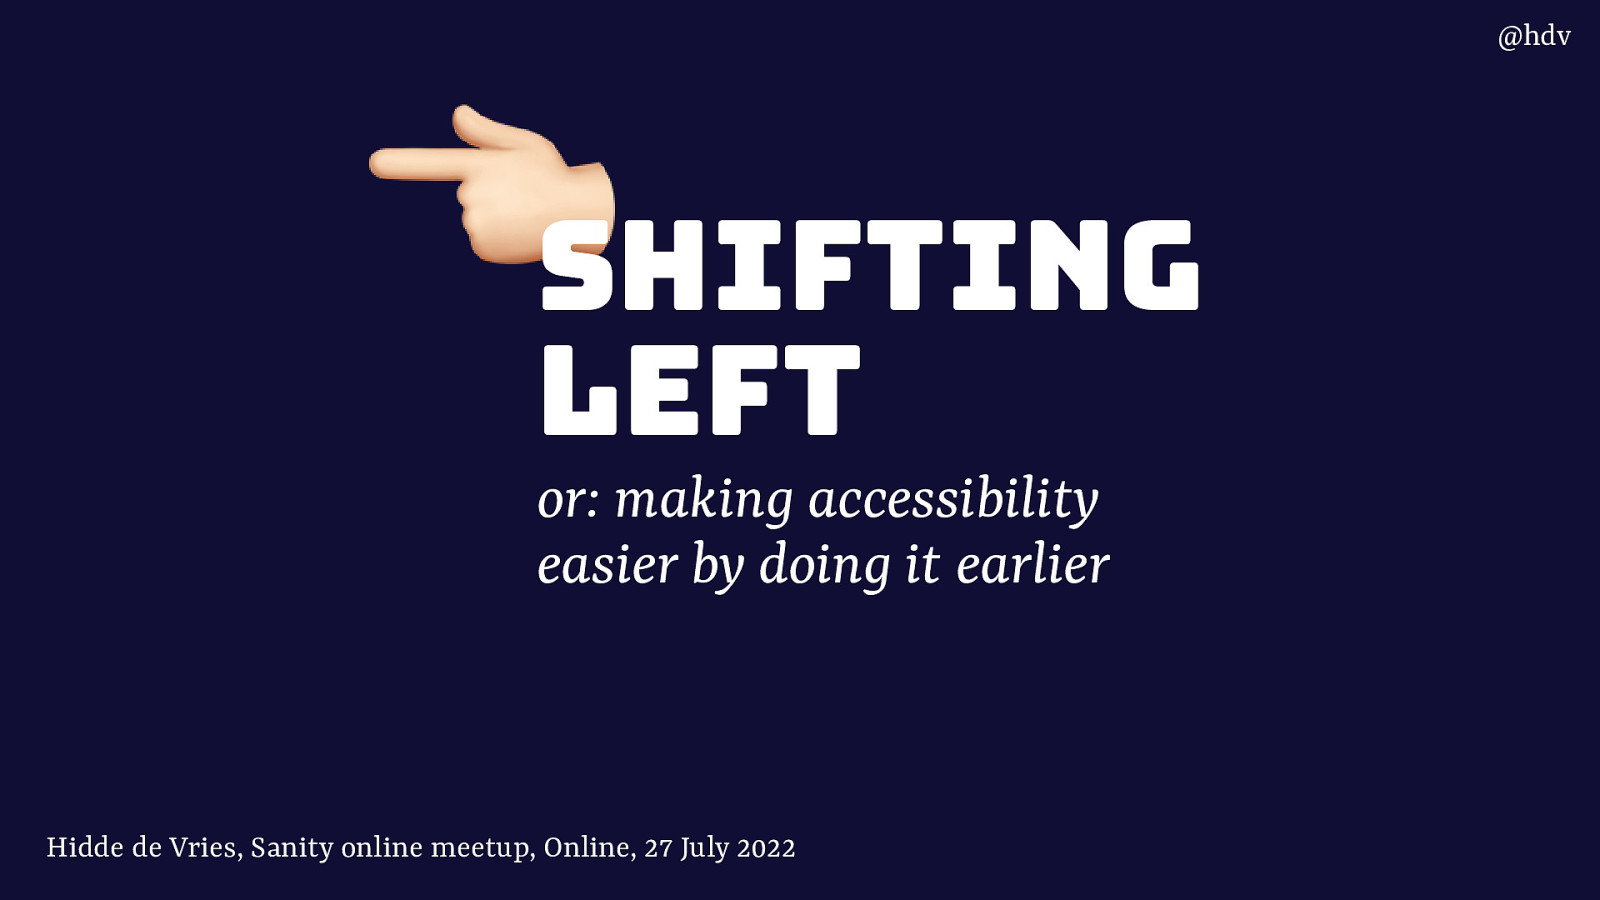 Shifting left, or: making accessibility easier by doing it earlier